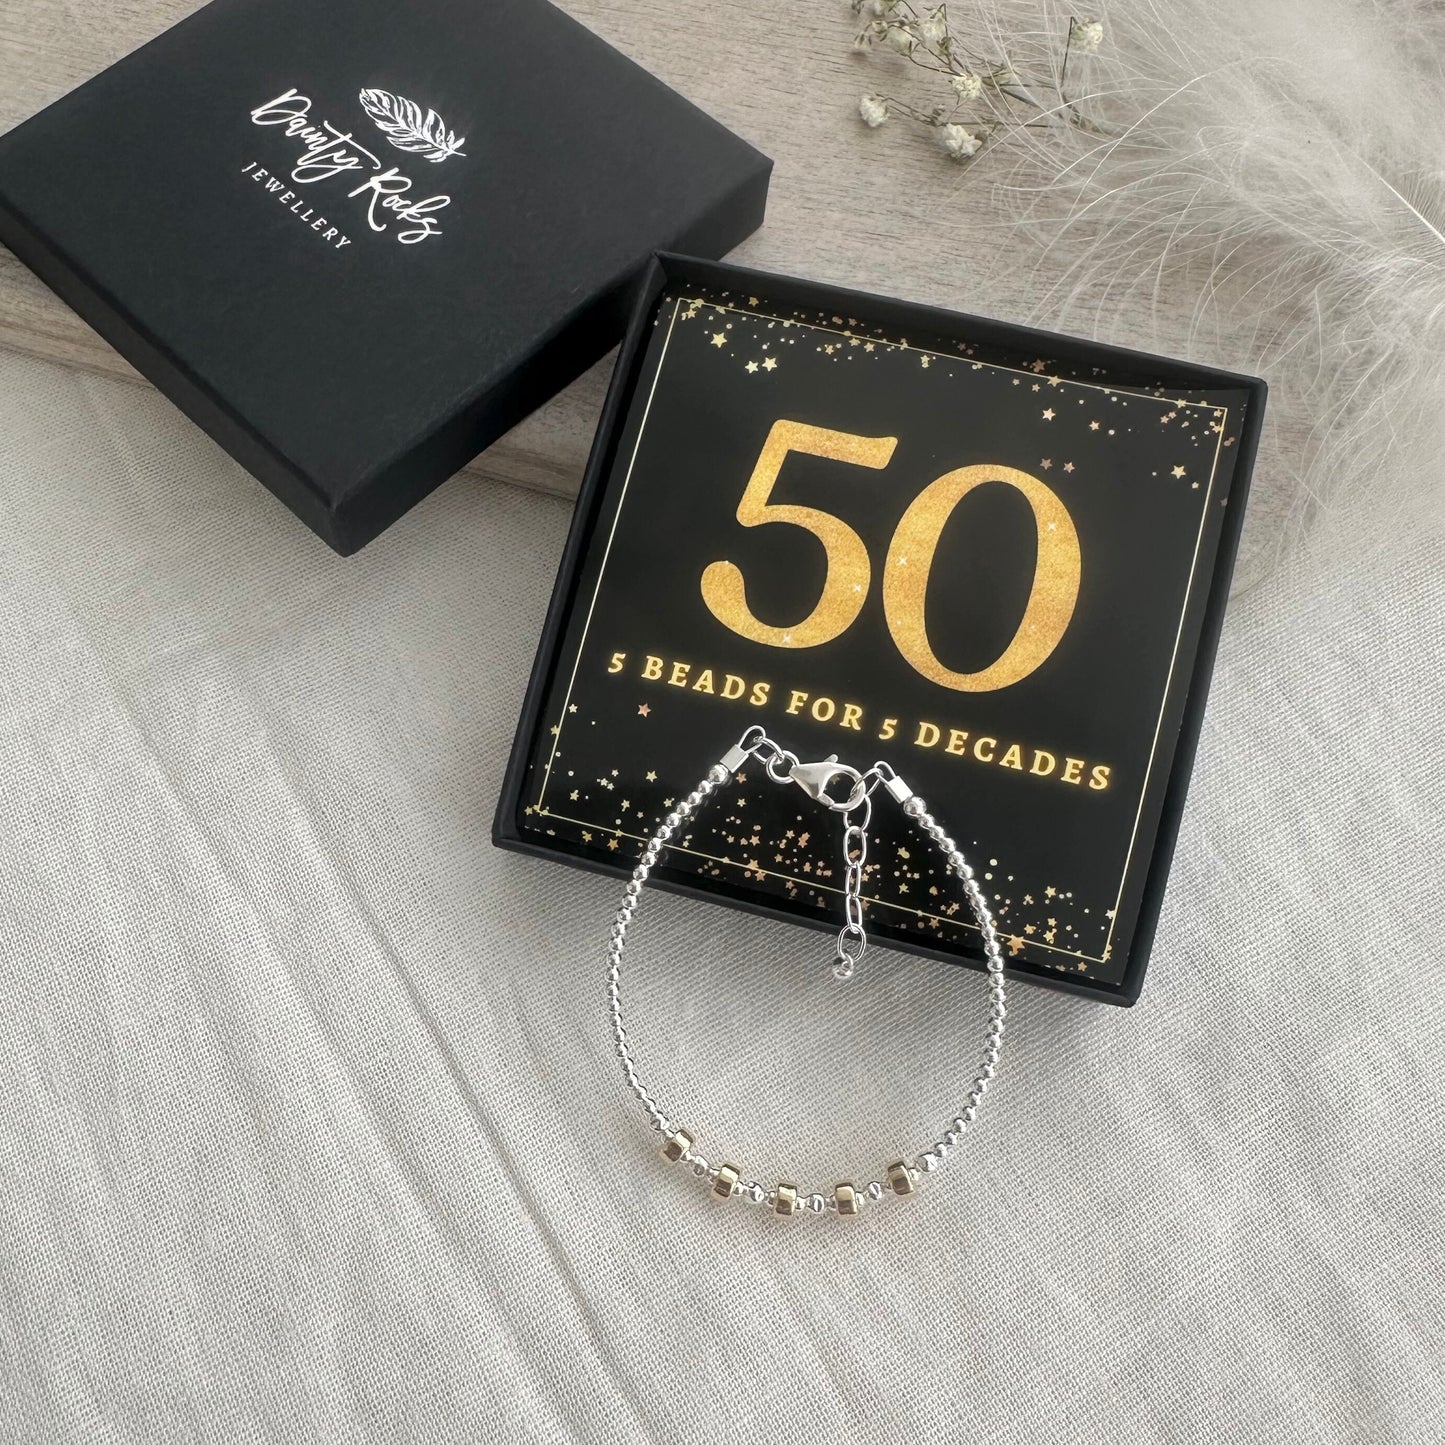 5 Decade Bracelet 50th Birthday Jewellery Gift for Her in Sterling Silver